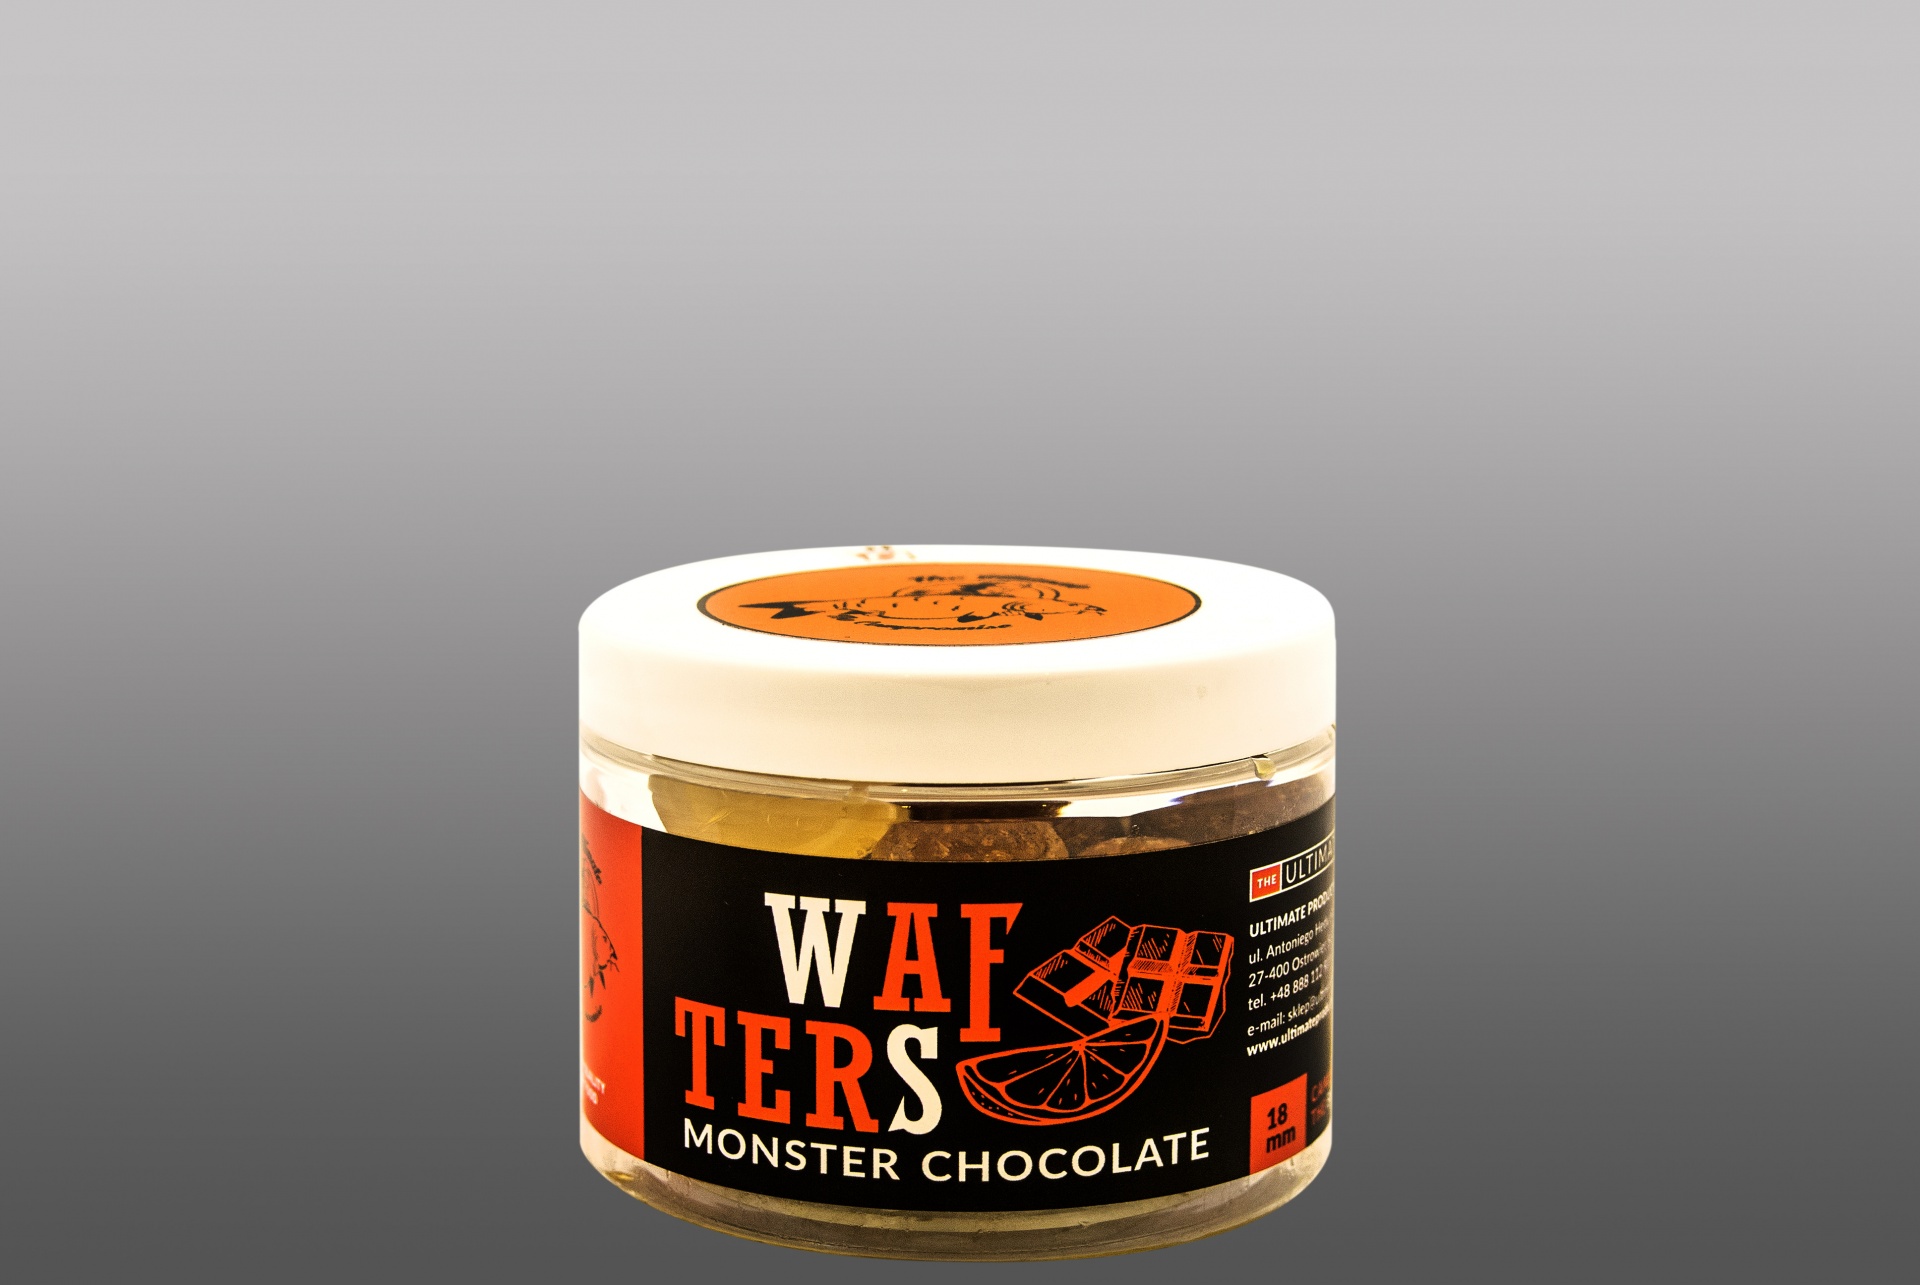 NEW UltimateProducts Monster Chocolate Wafters